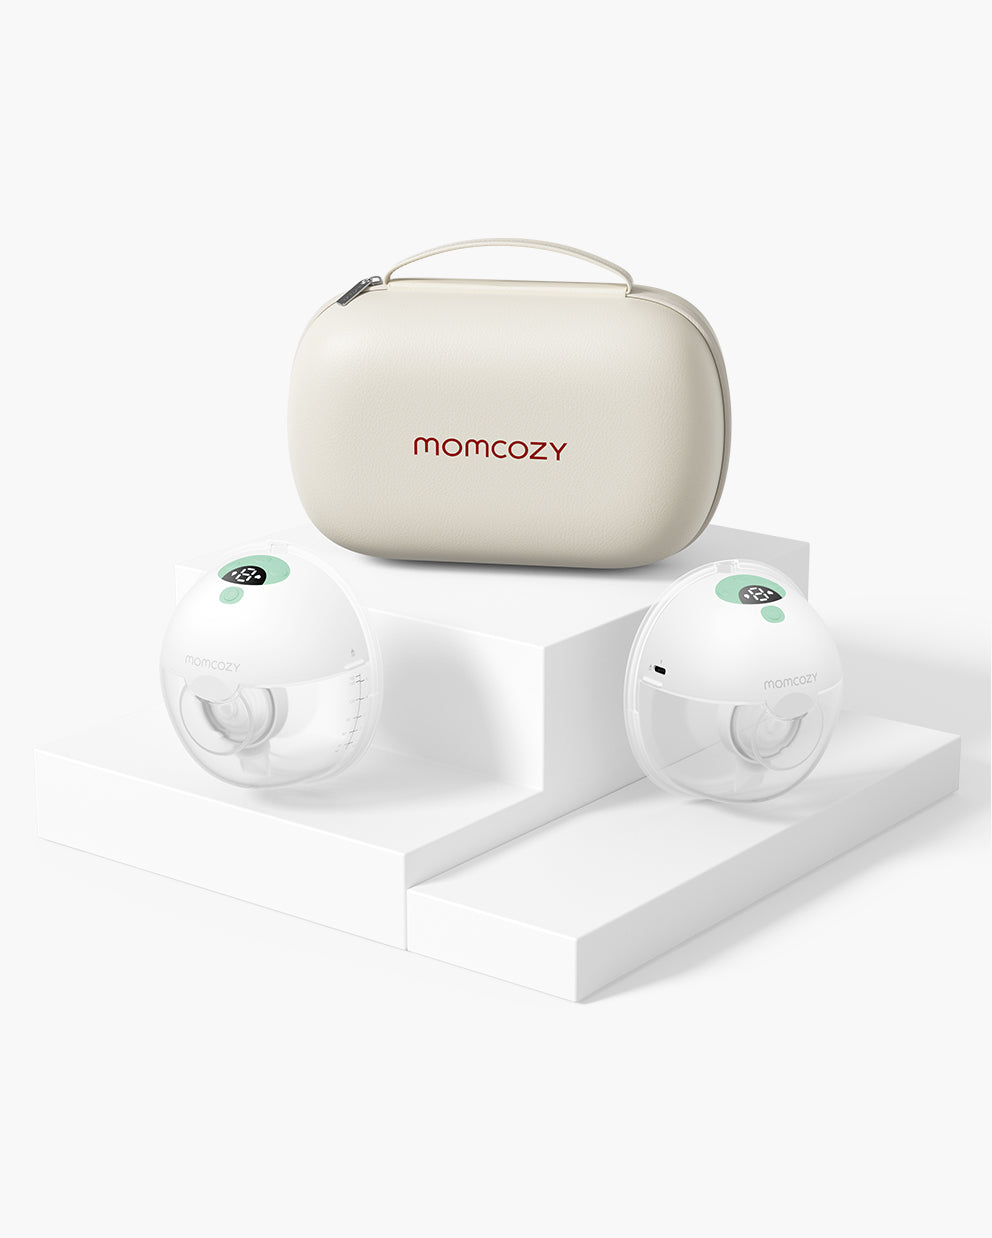 Stay hands free with the @momcozy m5 breast pumps!! If I could